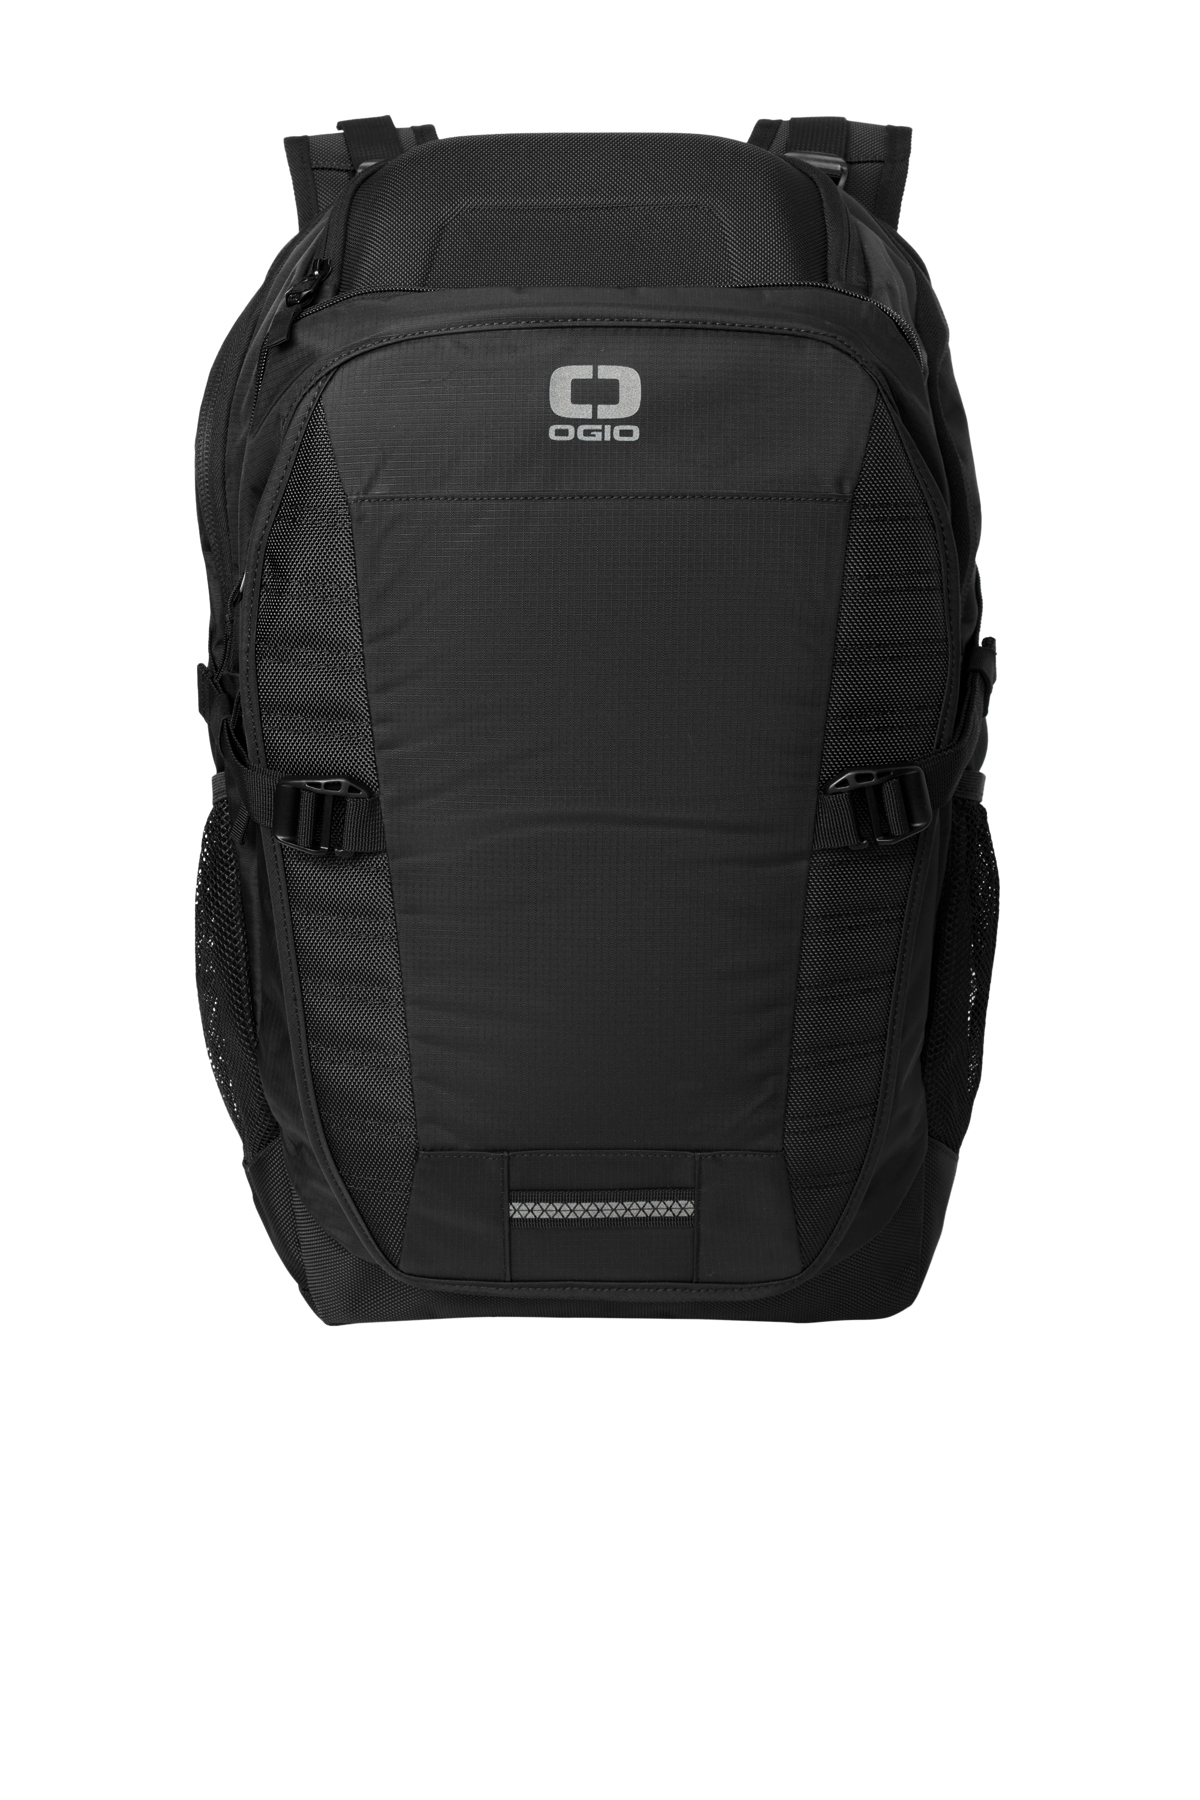 OGIO Motion X-Over Pack | Product | SanMar